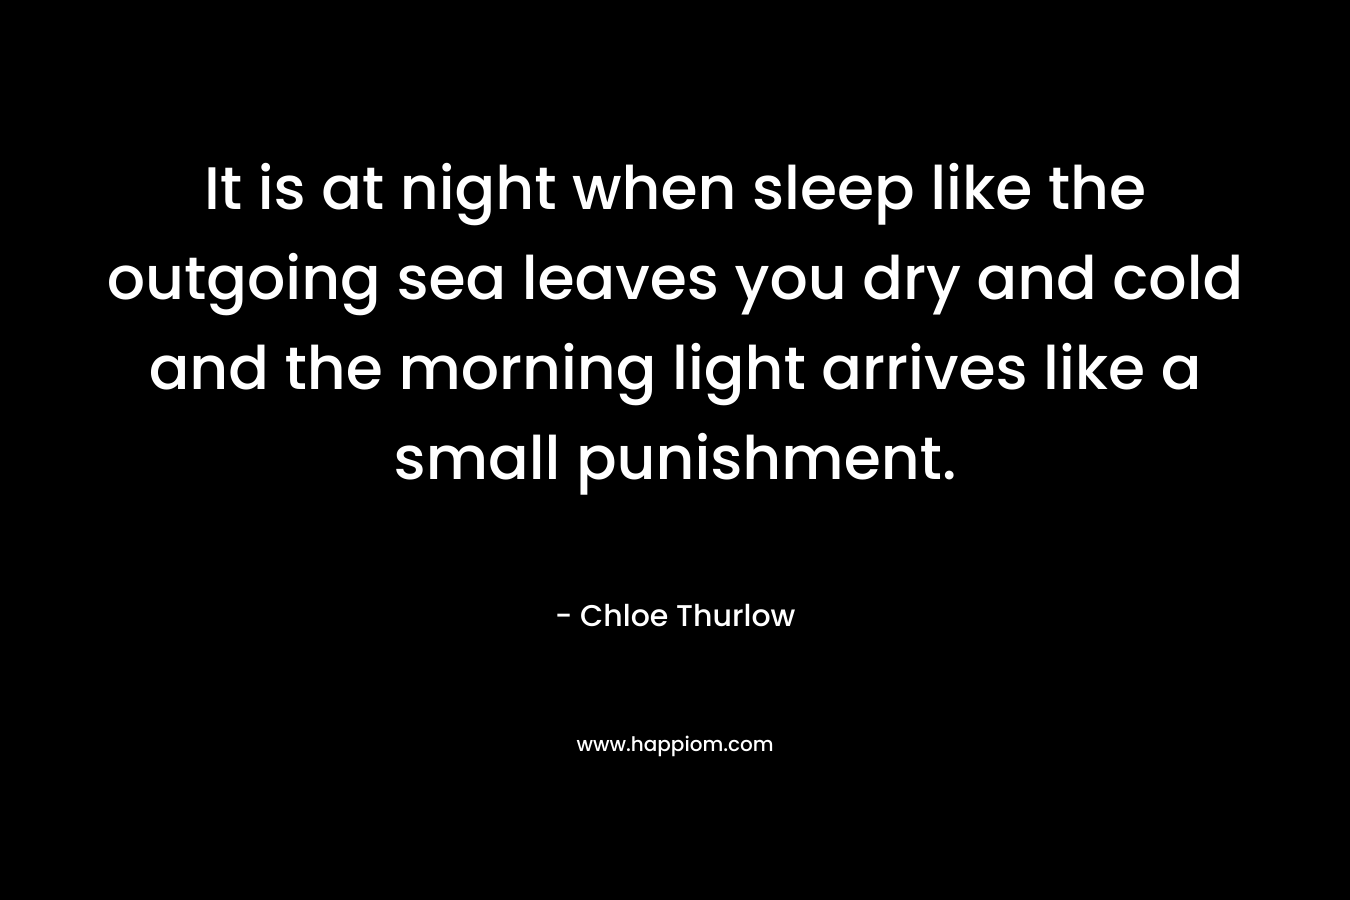 It is at night when sleep like the outgoing sea leaves you dry and cold and the morning light arrives like a small punishment. – Chloe Thurlow